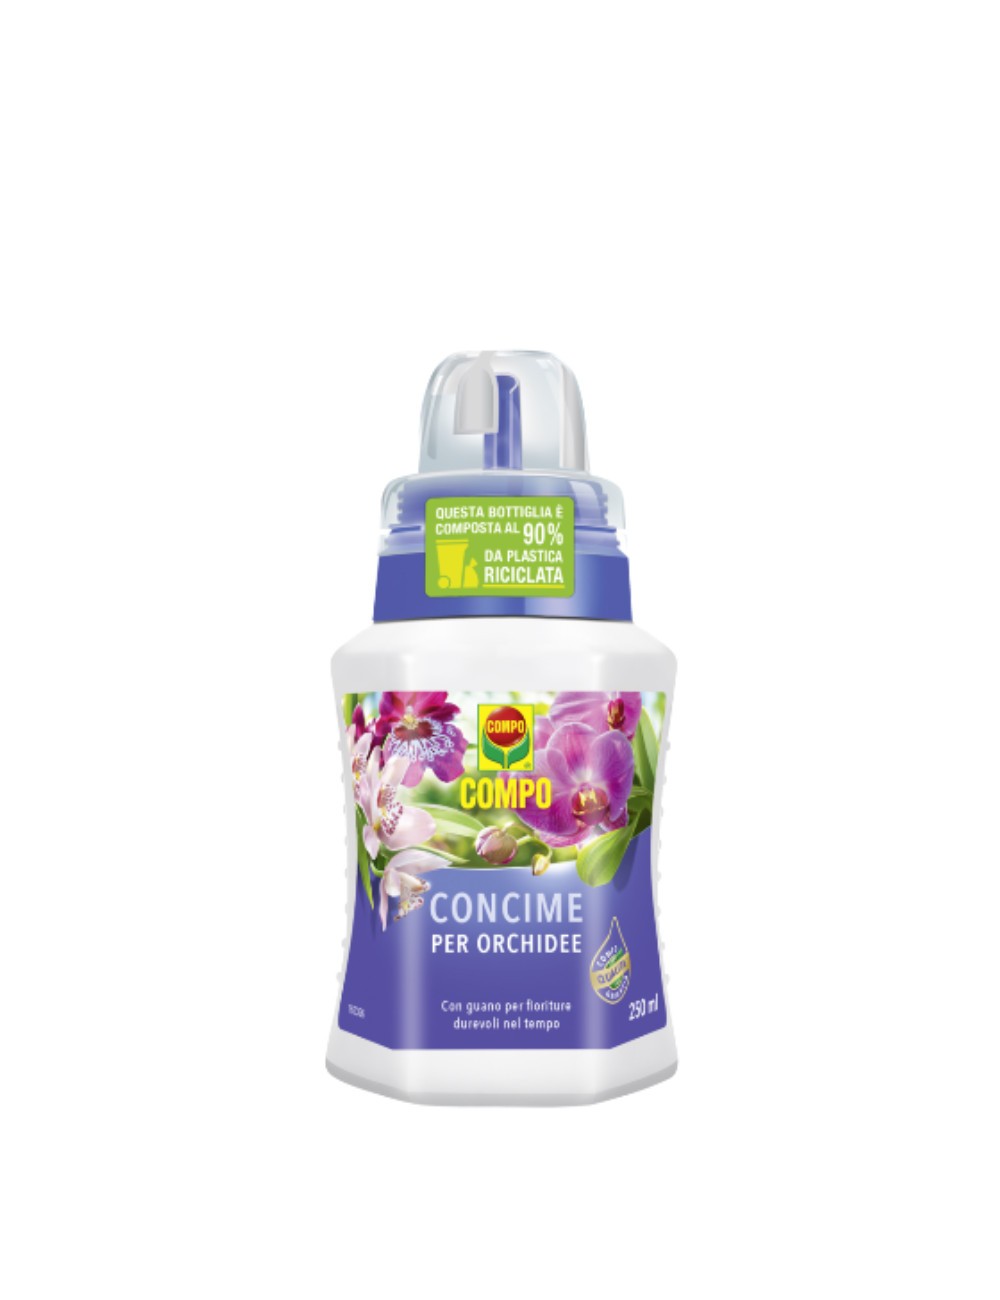 Compo Concime Per Orchidee 250ml Products for the Care and